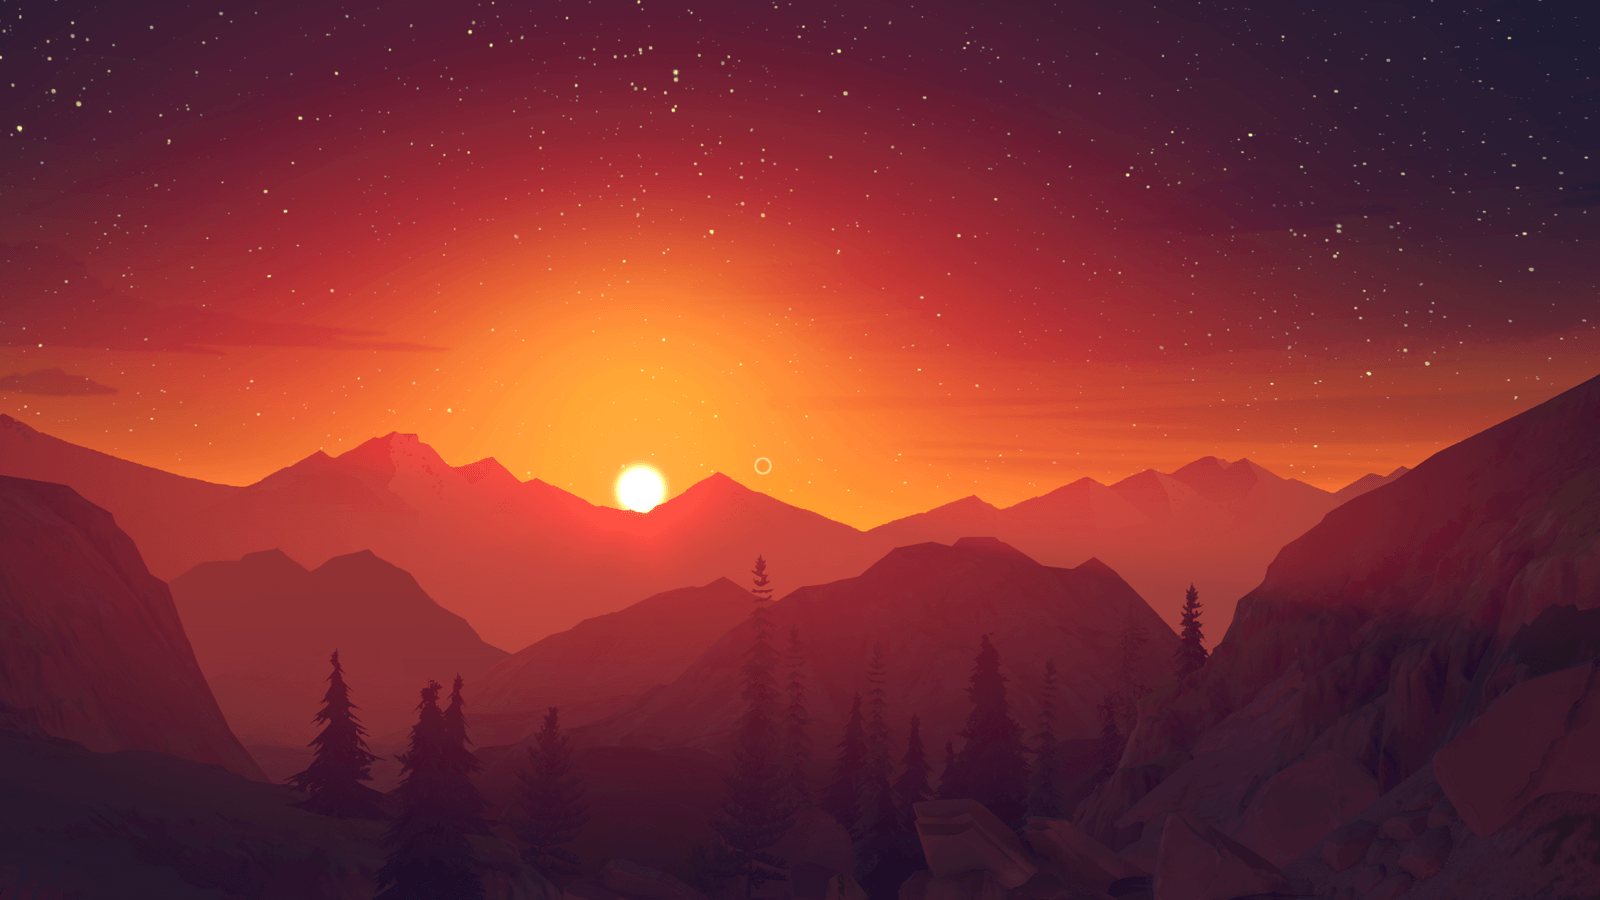 The End of Firewatch